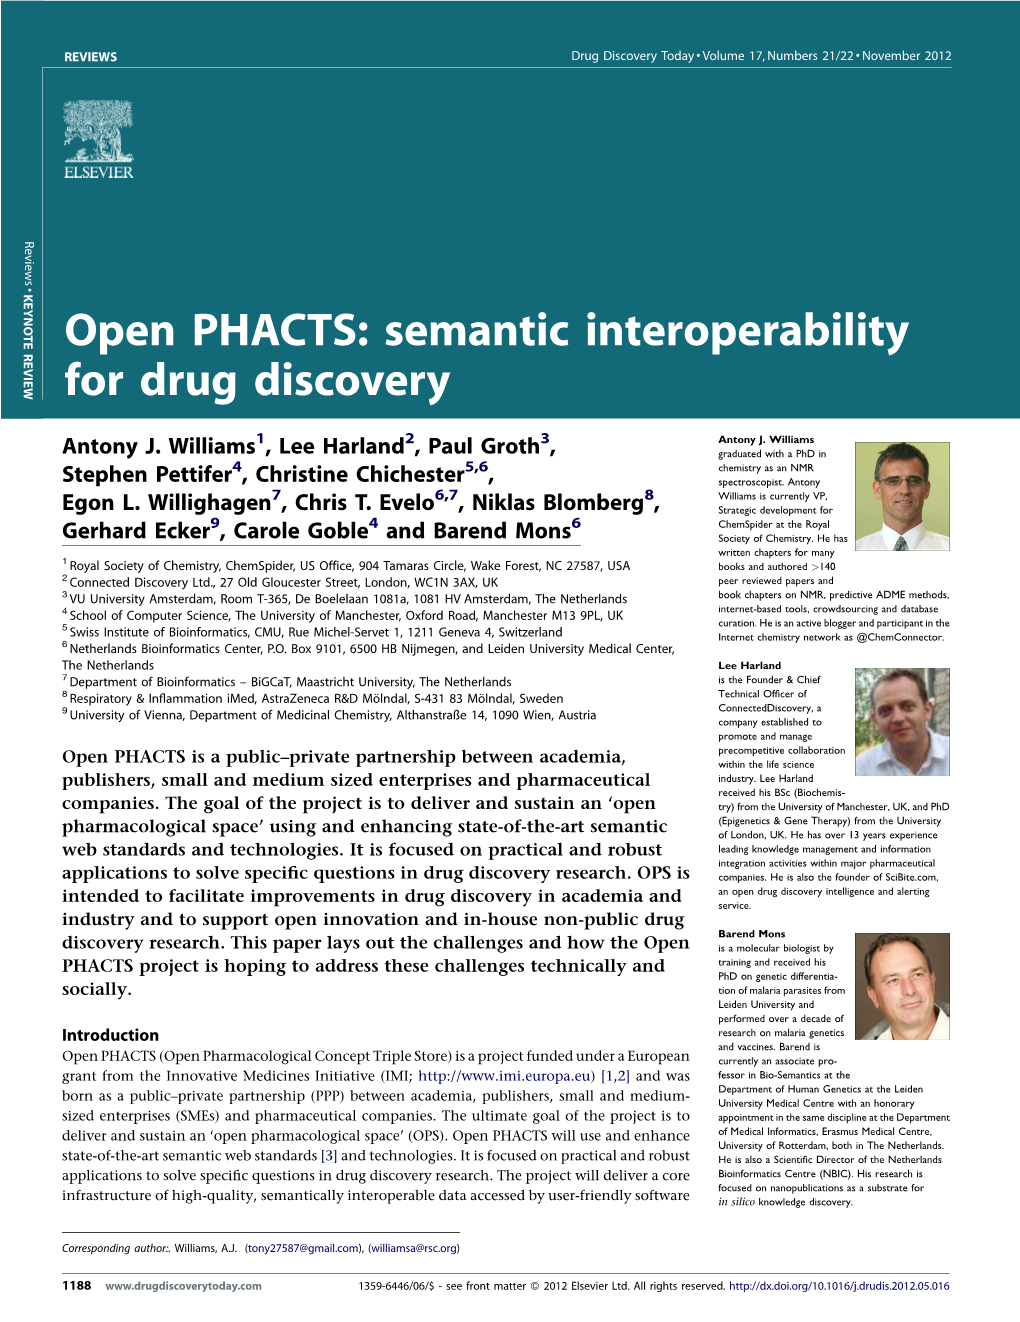 Open PHACTS: Semantic Interoperability for Drug Discovery